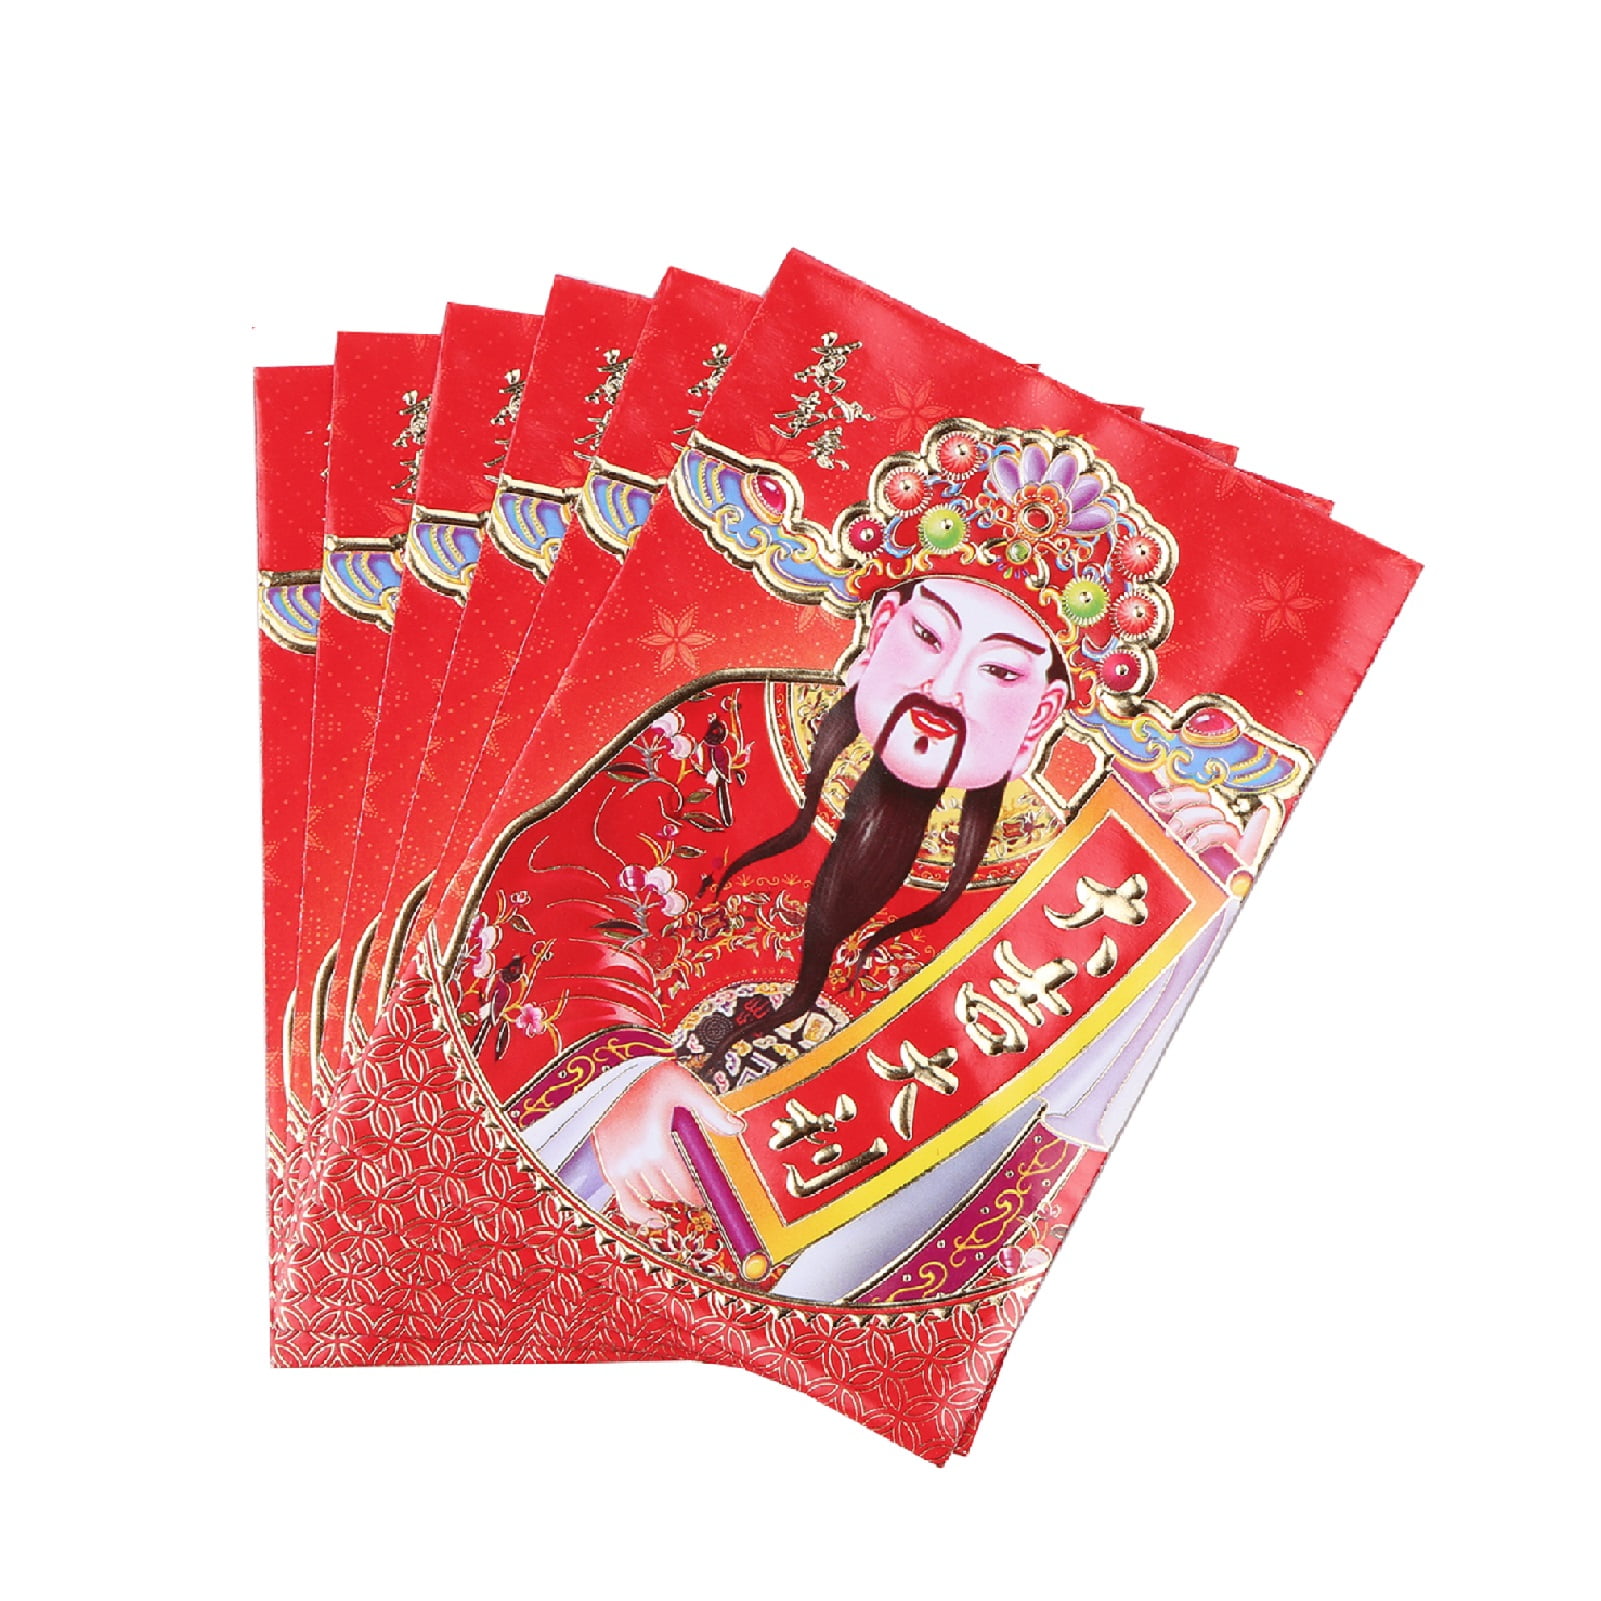 Htovila 21 Chinese New Year Red Envelope Chinese Zodiac Year Of The Ox Cartoon Image Spring Festival Red Packet Lucky Money Envelopes Hong Bao Pack Of 6 Walmart Com